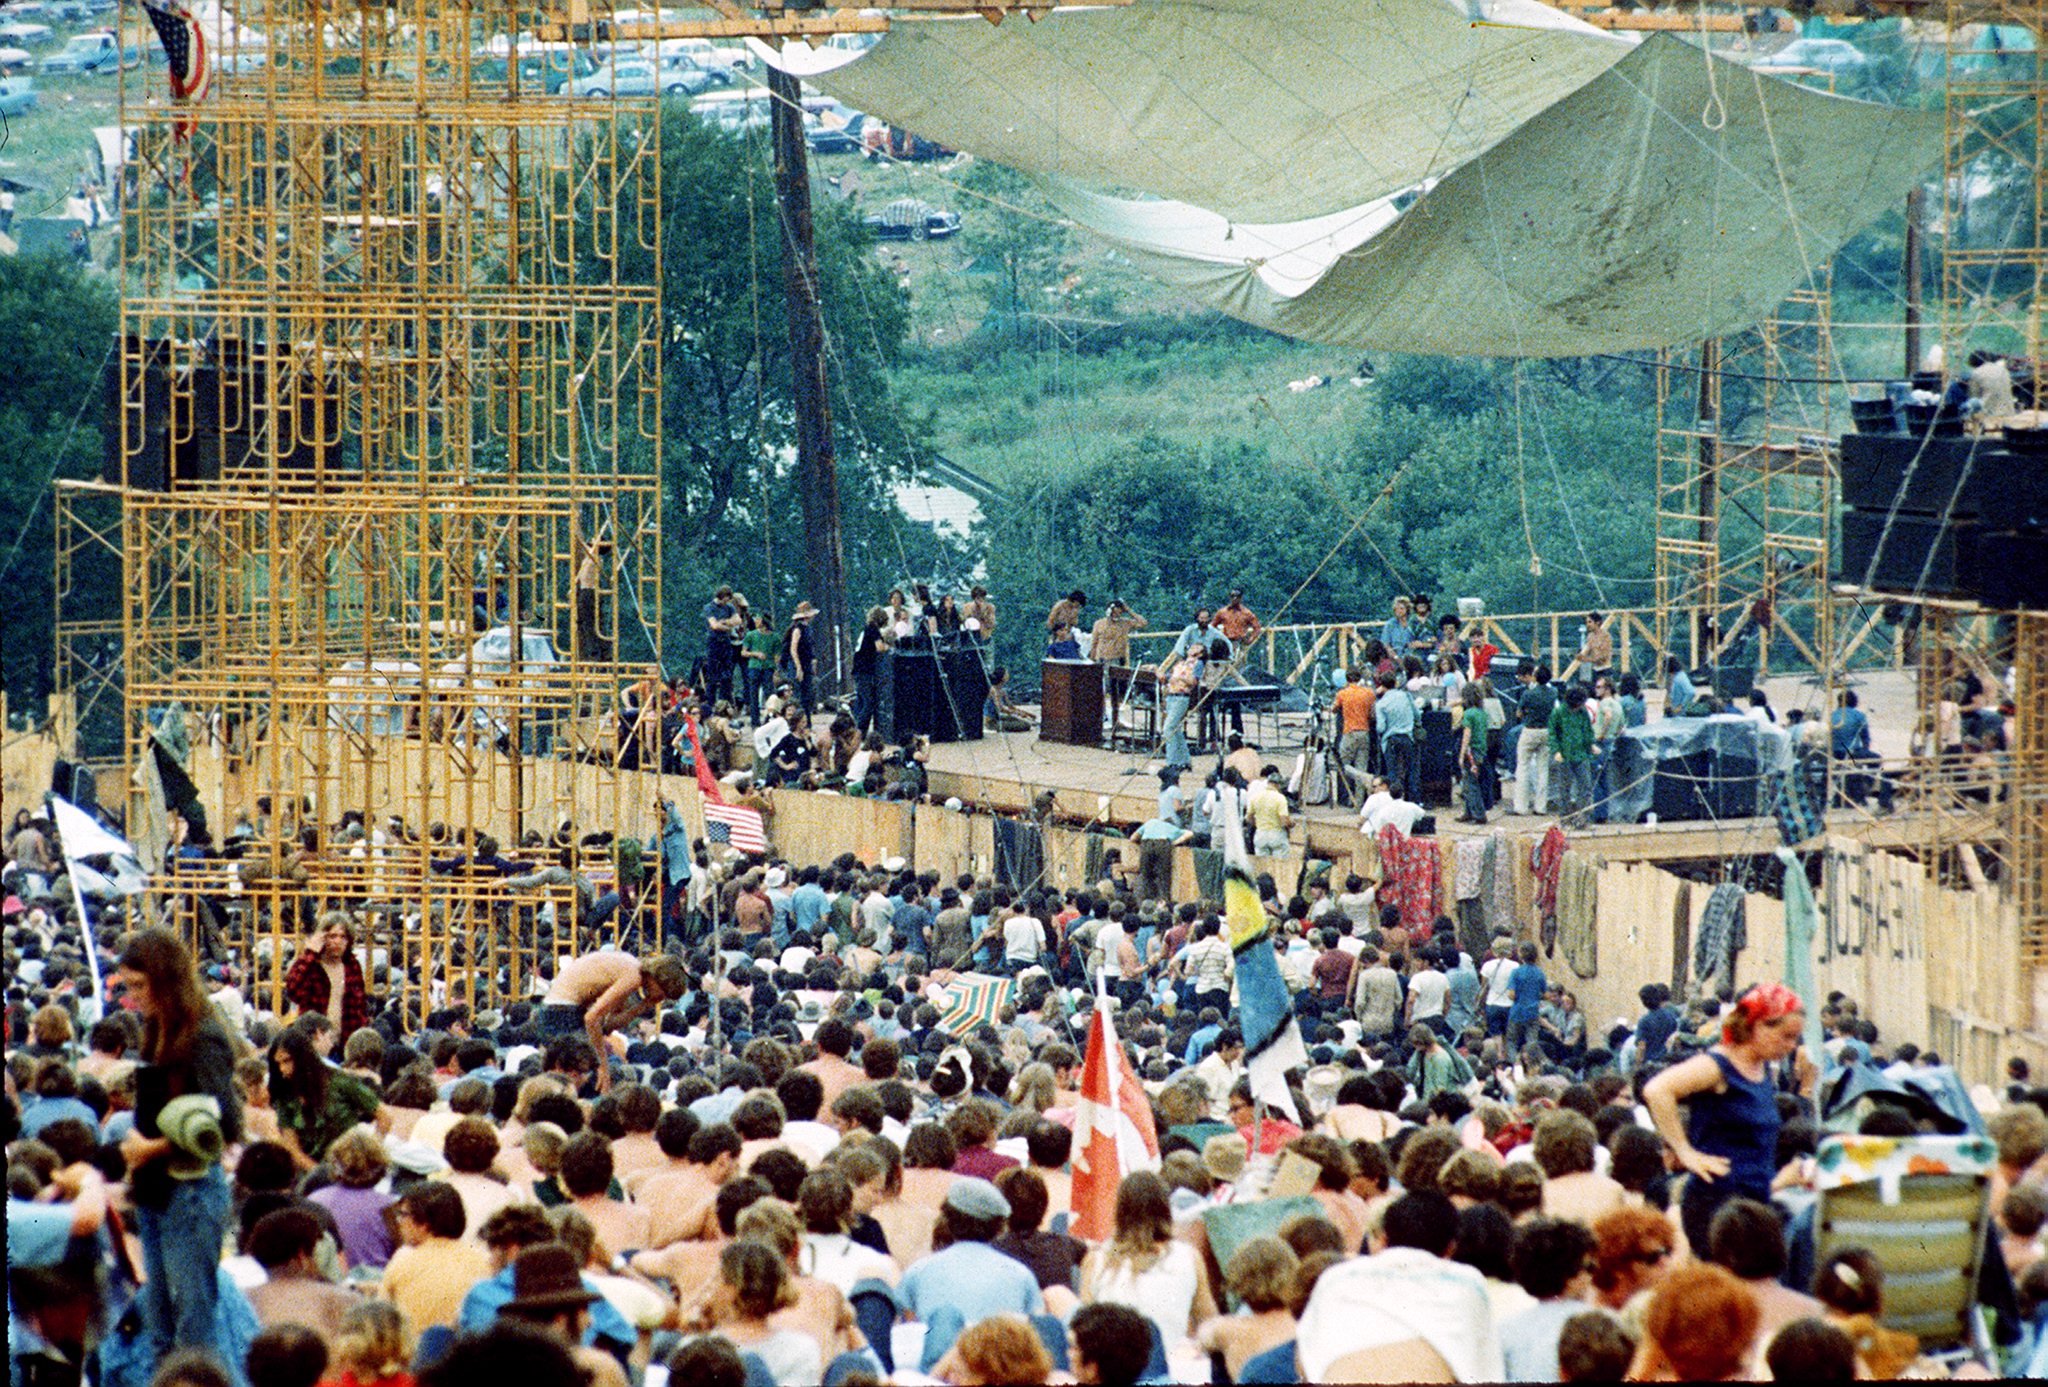 Woodstock Festival of Arts and Music at Bethel, New York, August 1969. (AP Photo)